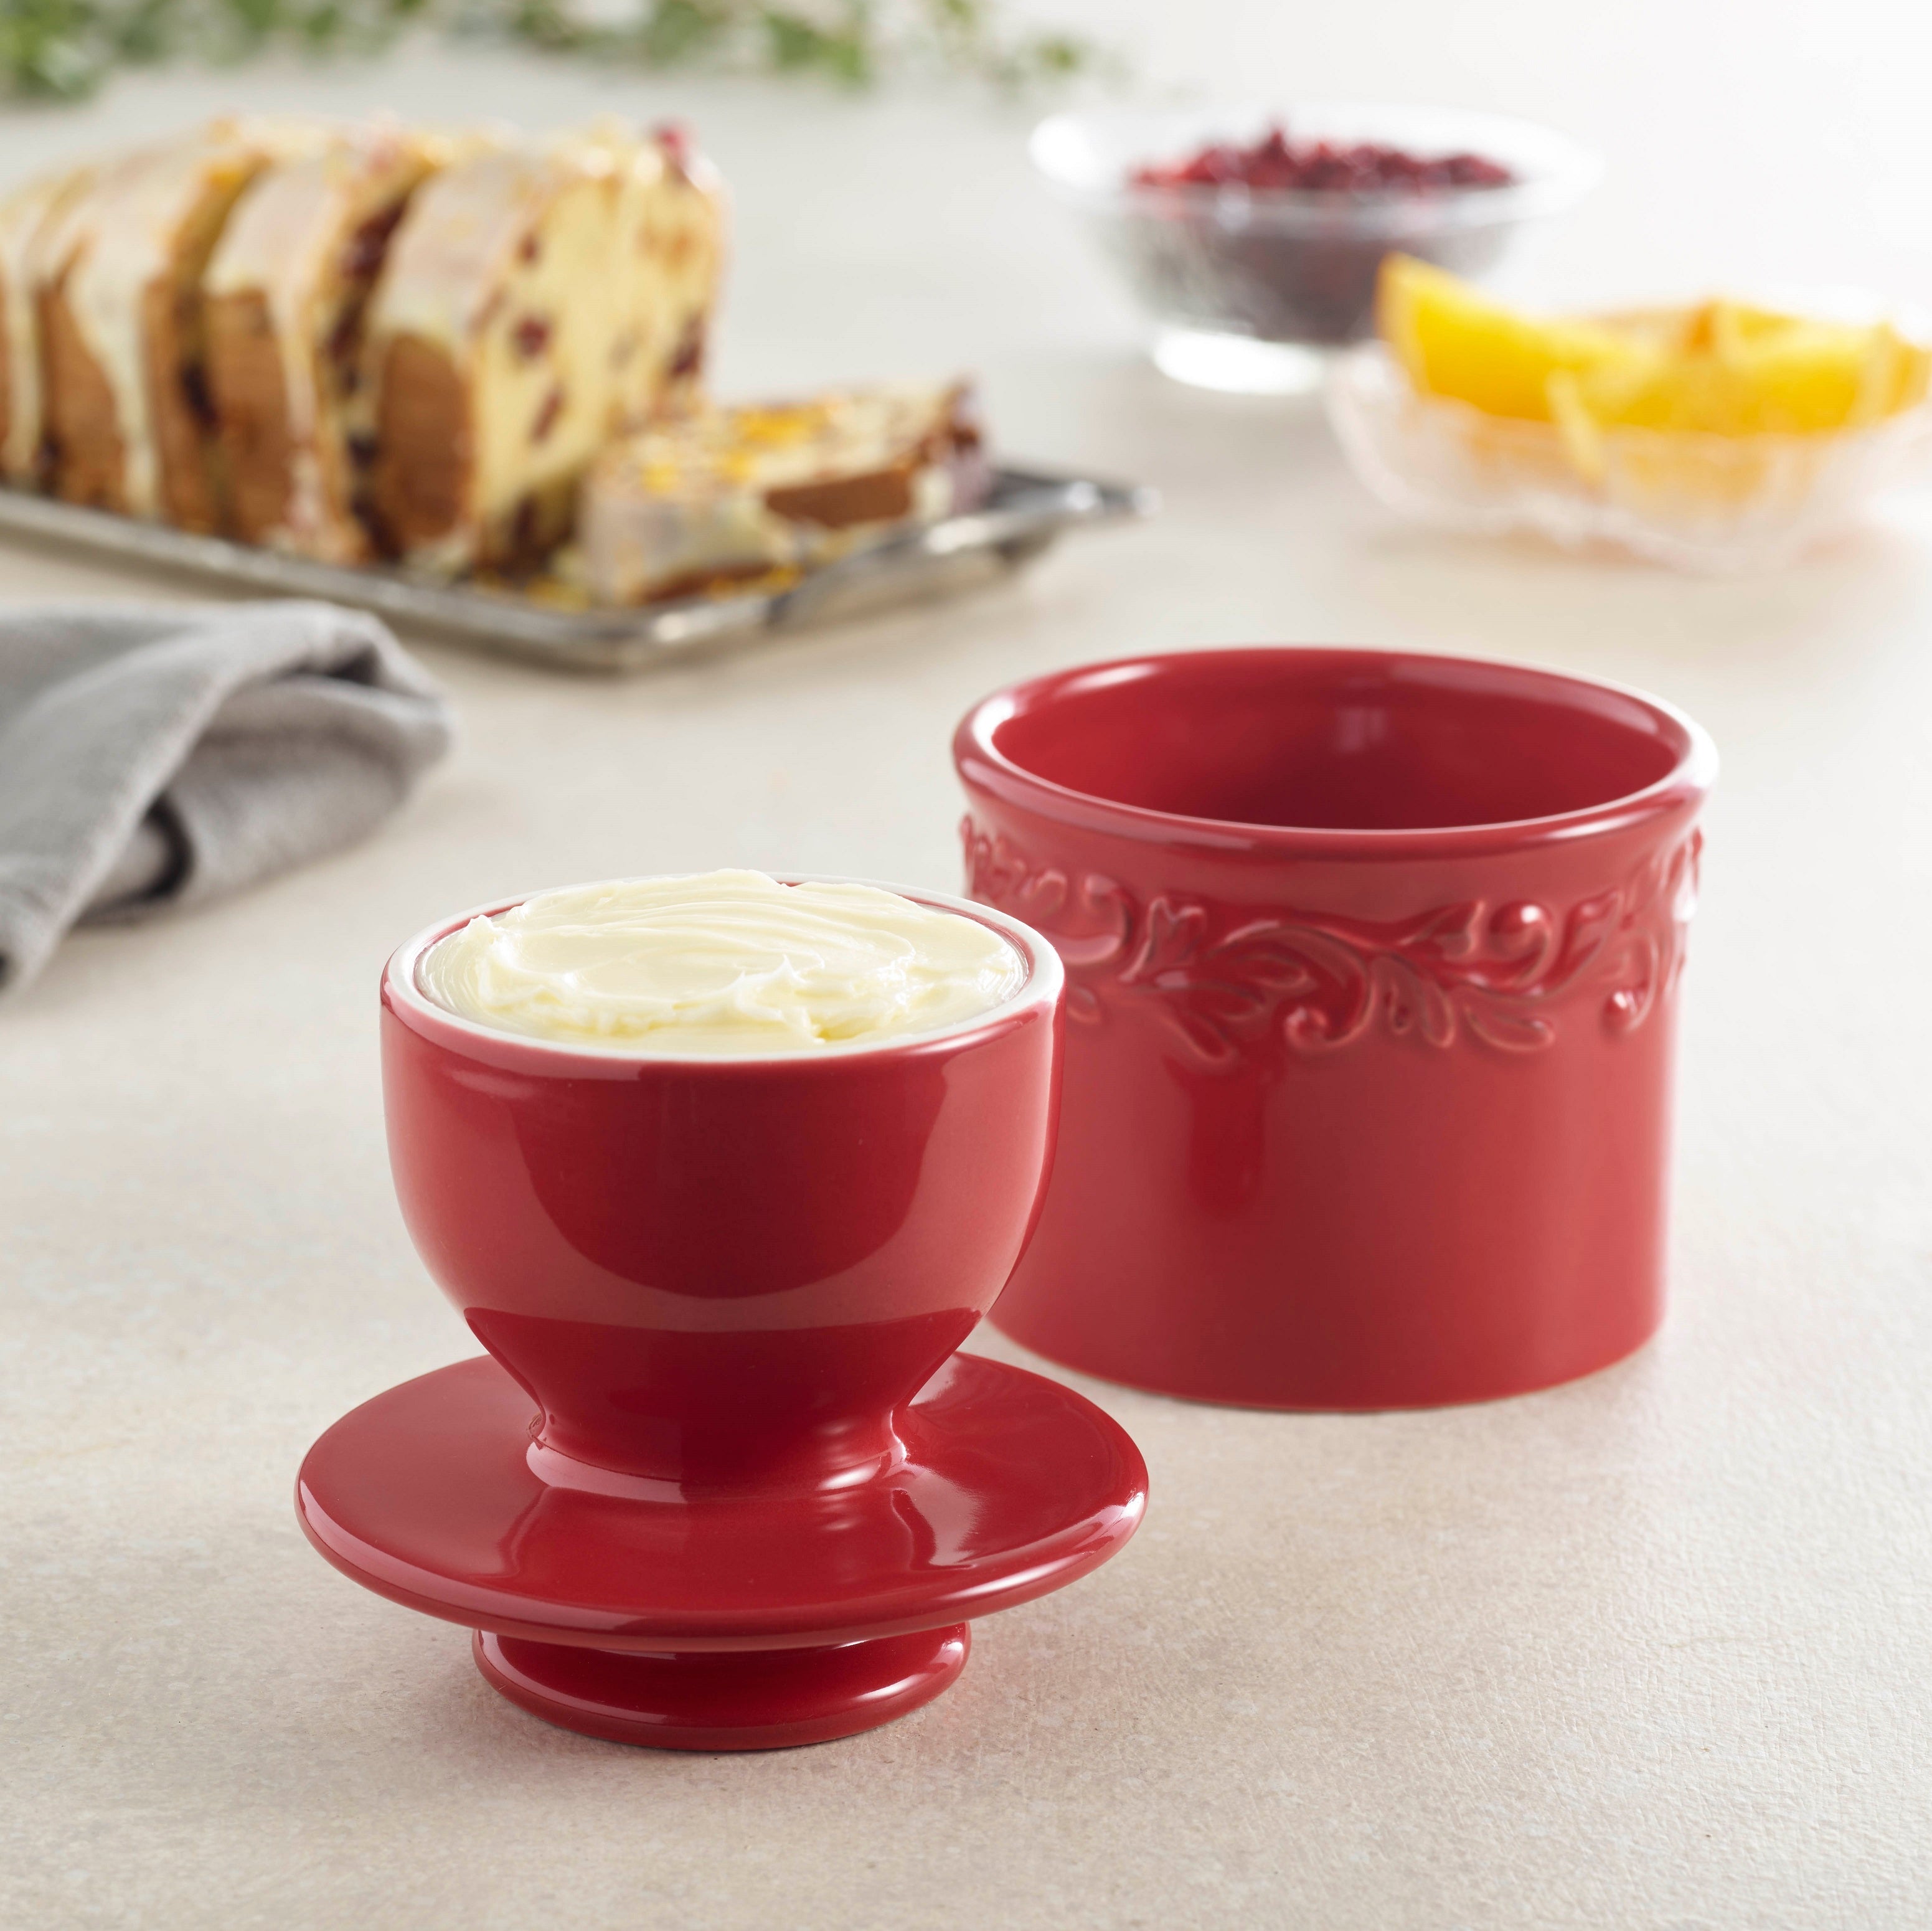 How it works: Le Creuset Butter Bell